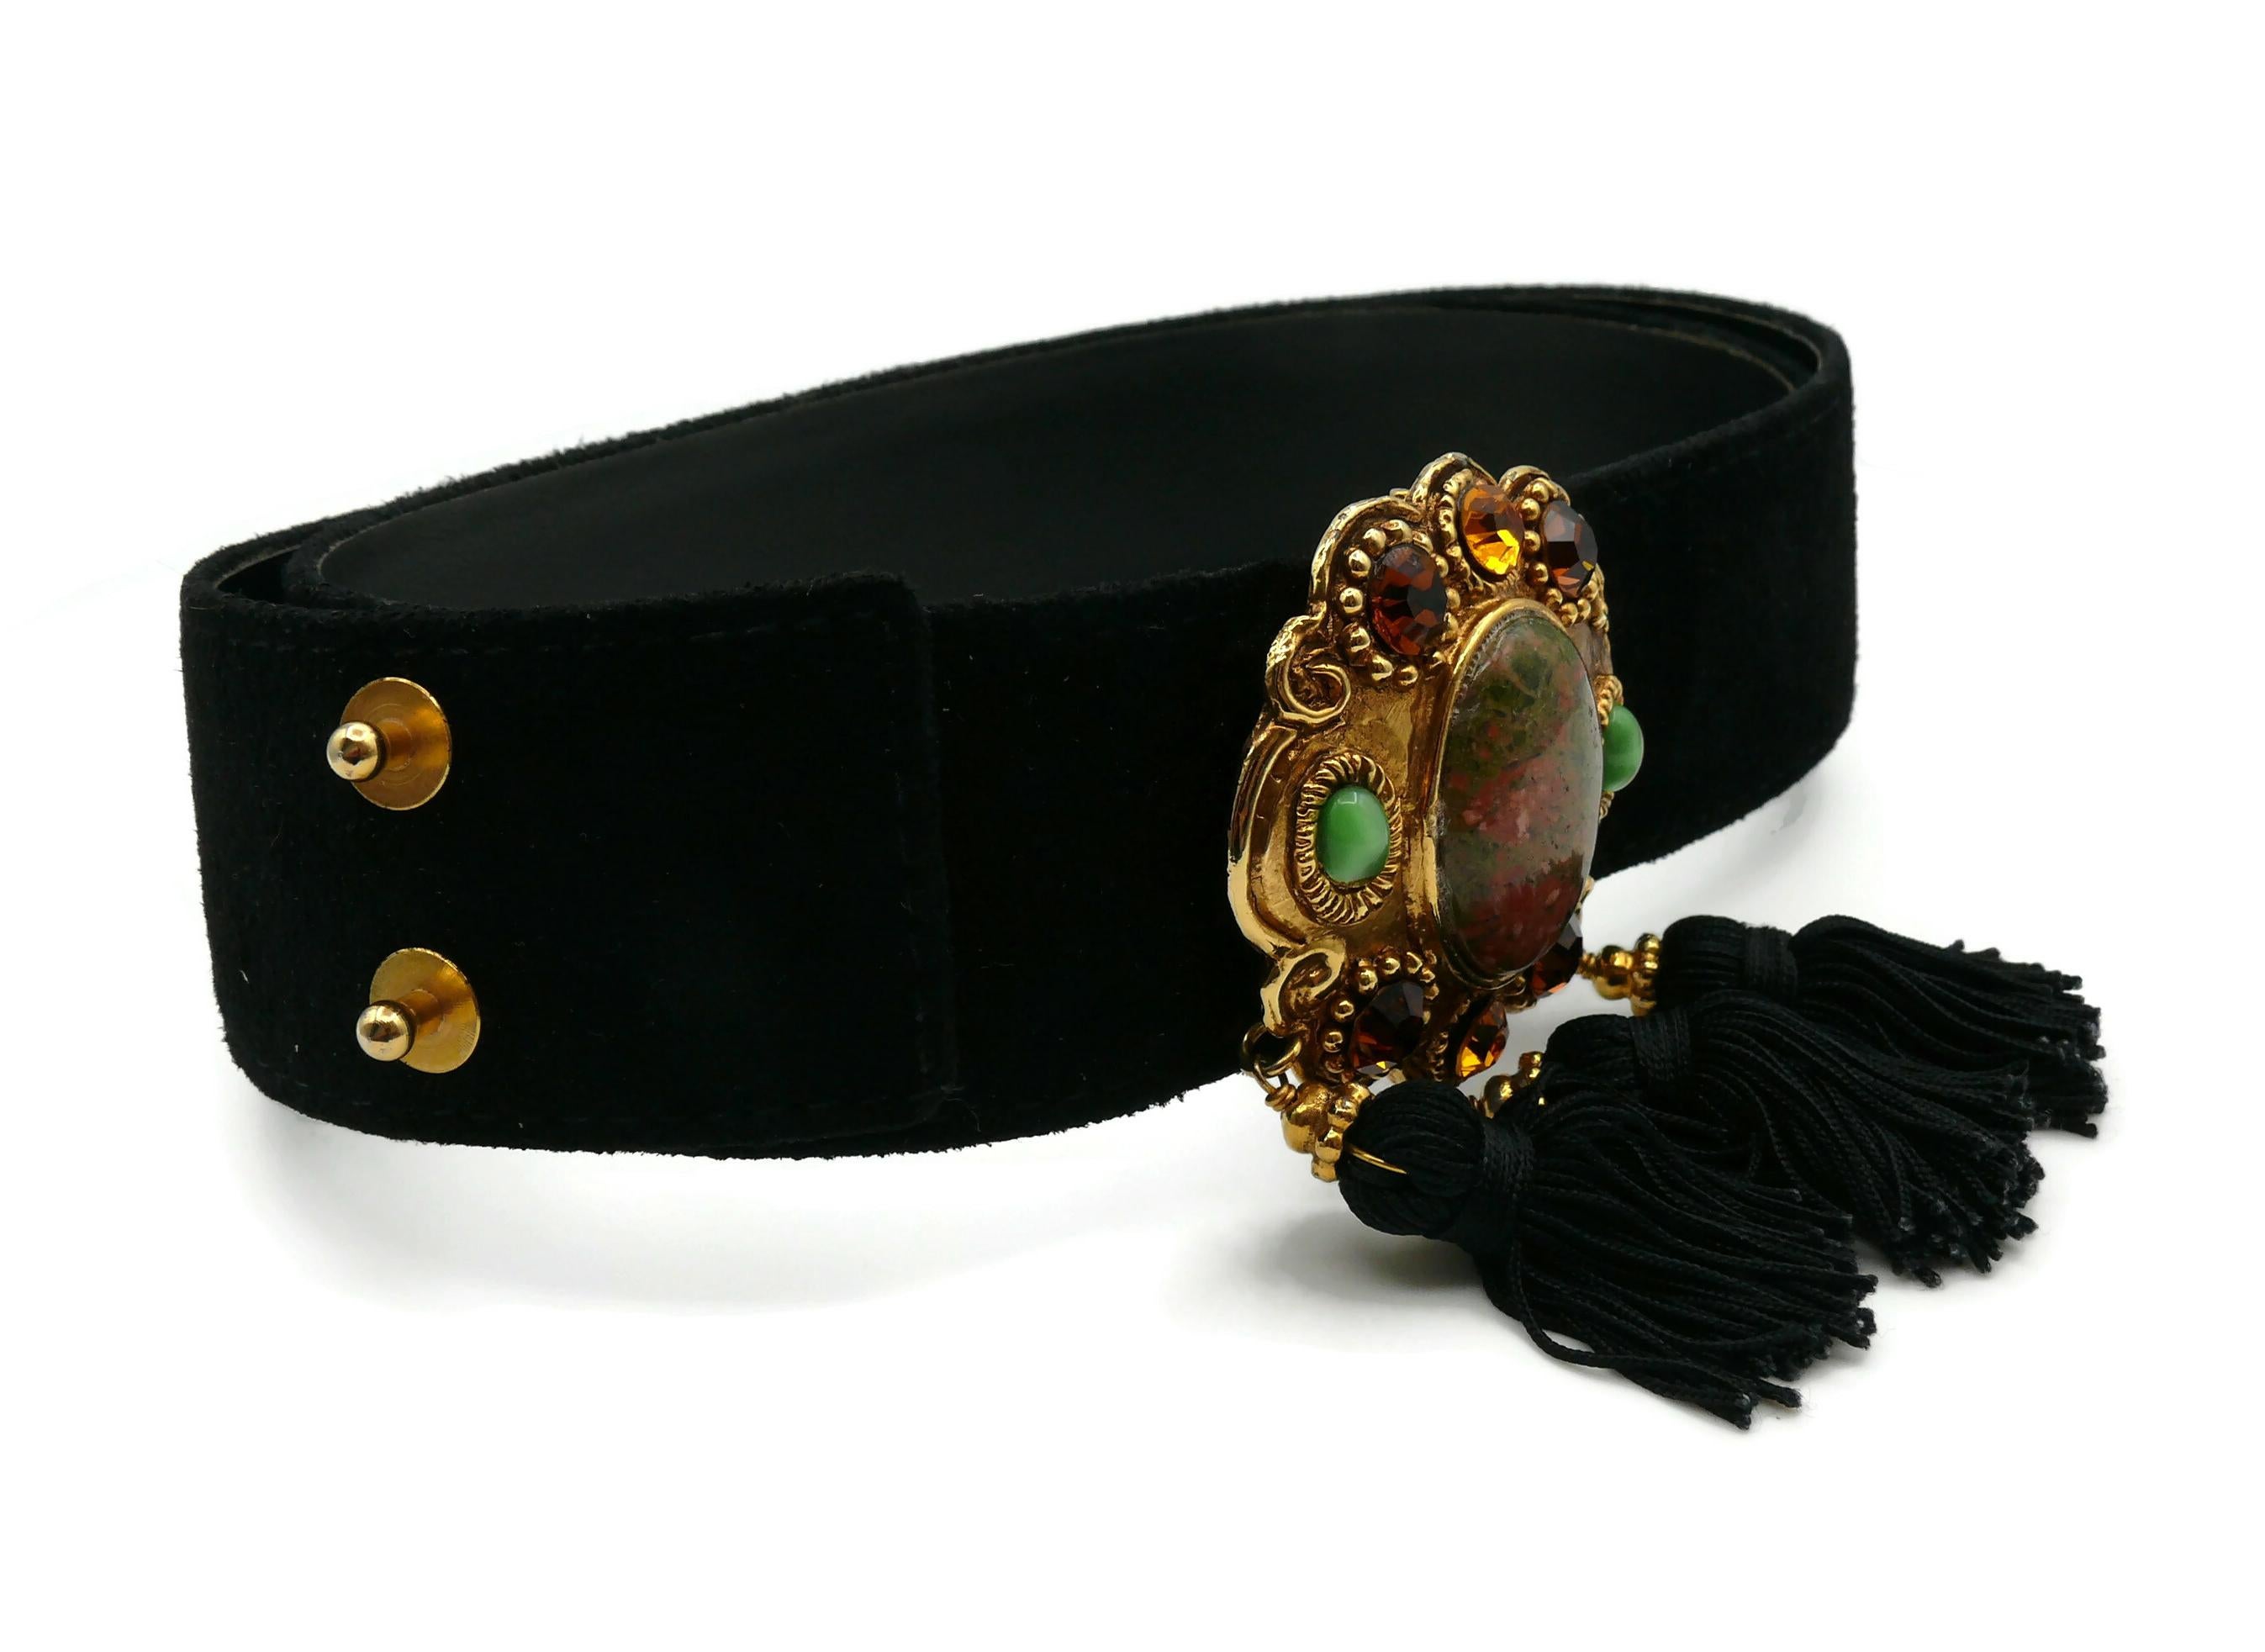 CHRISTIAN LACROIX Vintage Suede Leather Belt with Jewelled Medallion & Tassels In Good Condition For Sale In Nice, FR